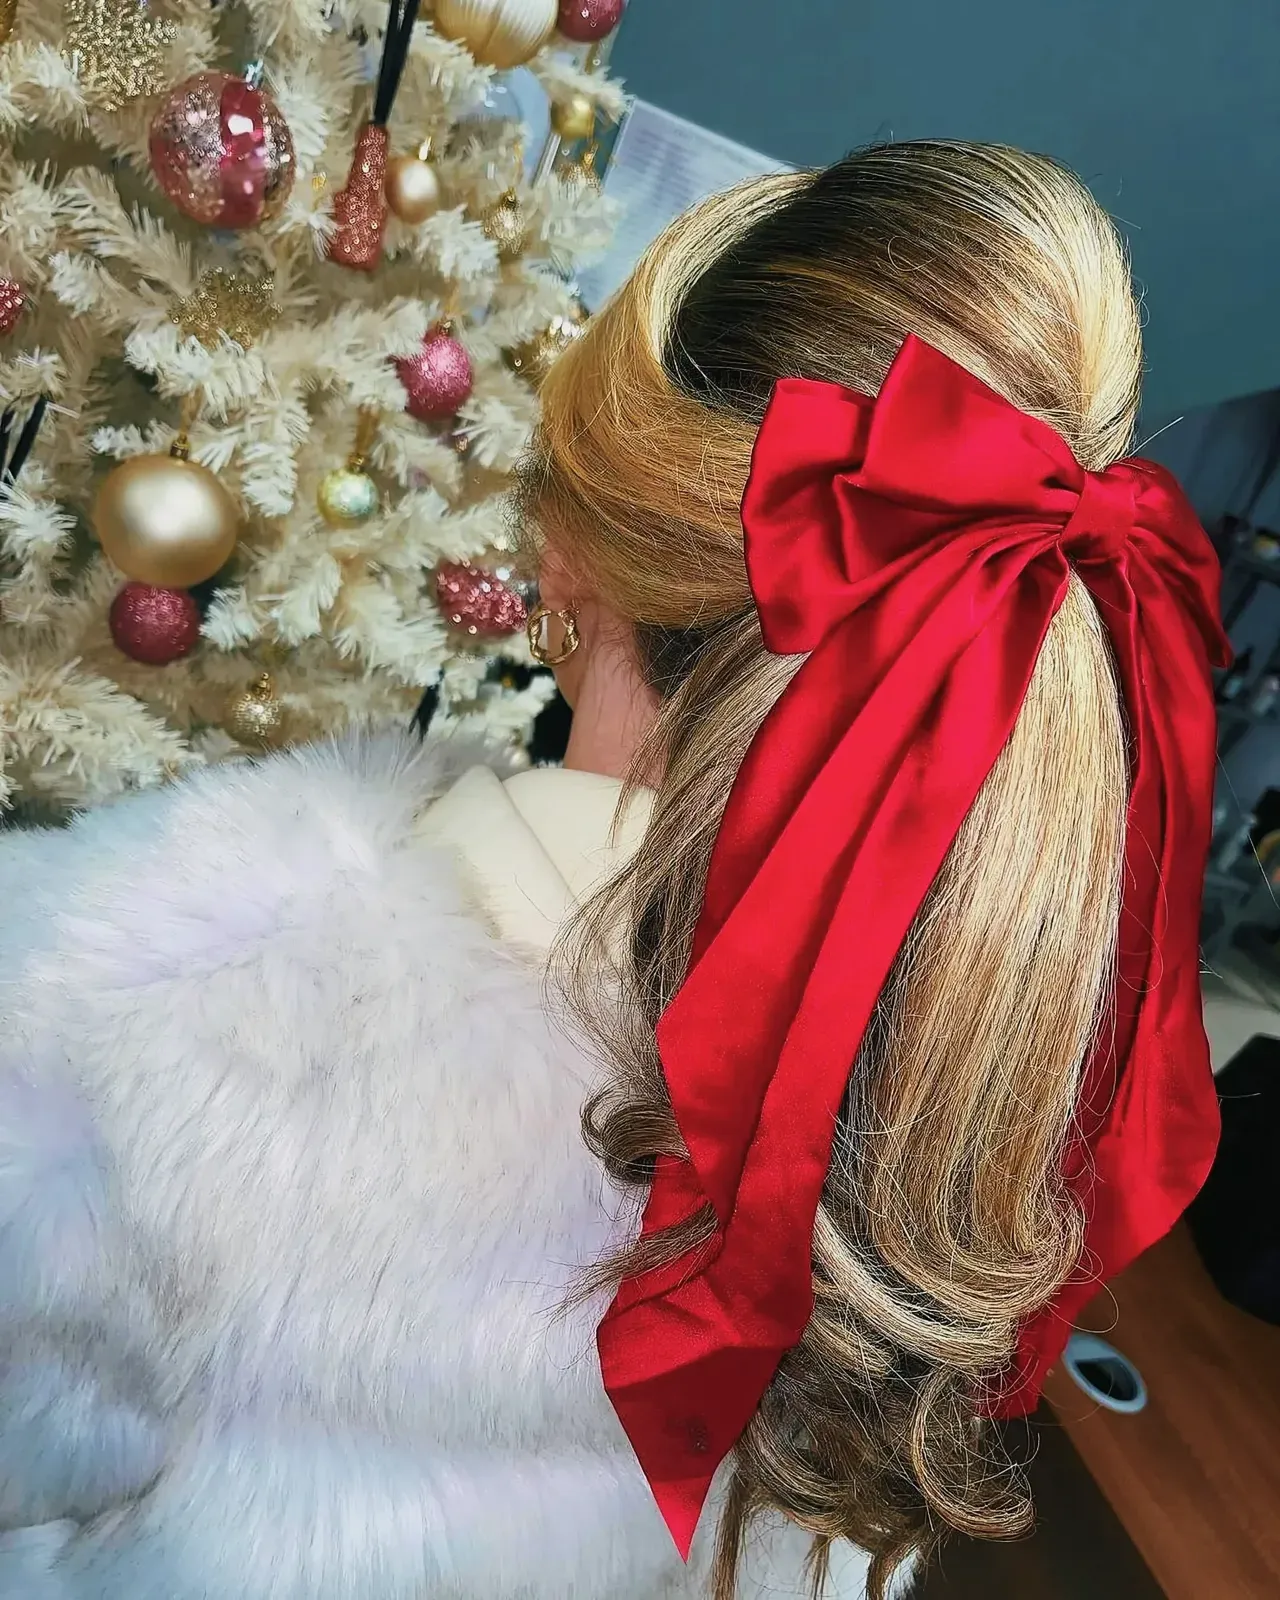 Festive Christmas hairstyle with a fashionable woman wearing a red bow